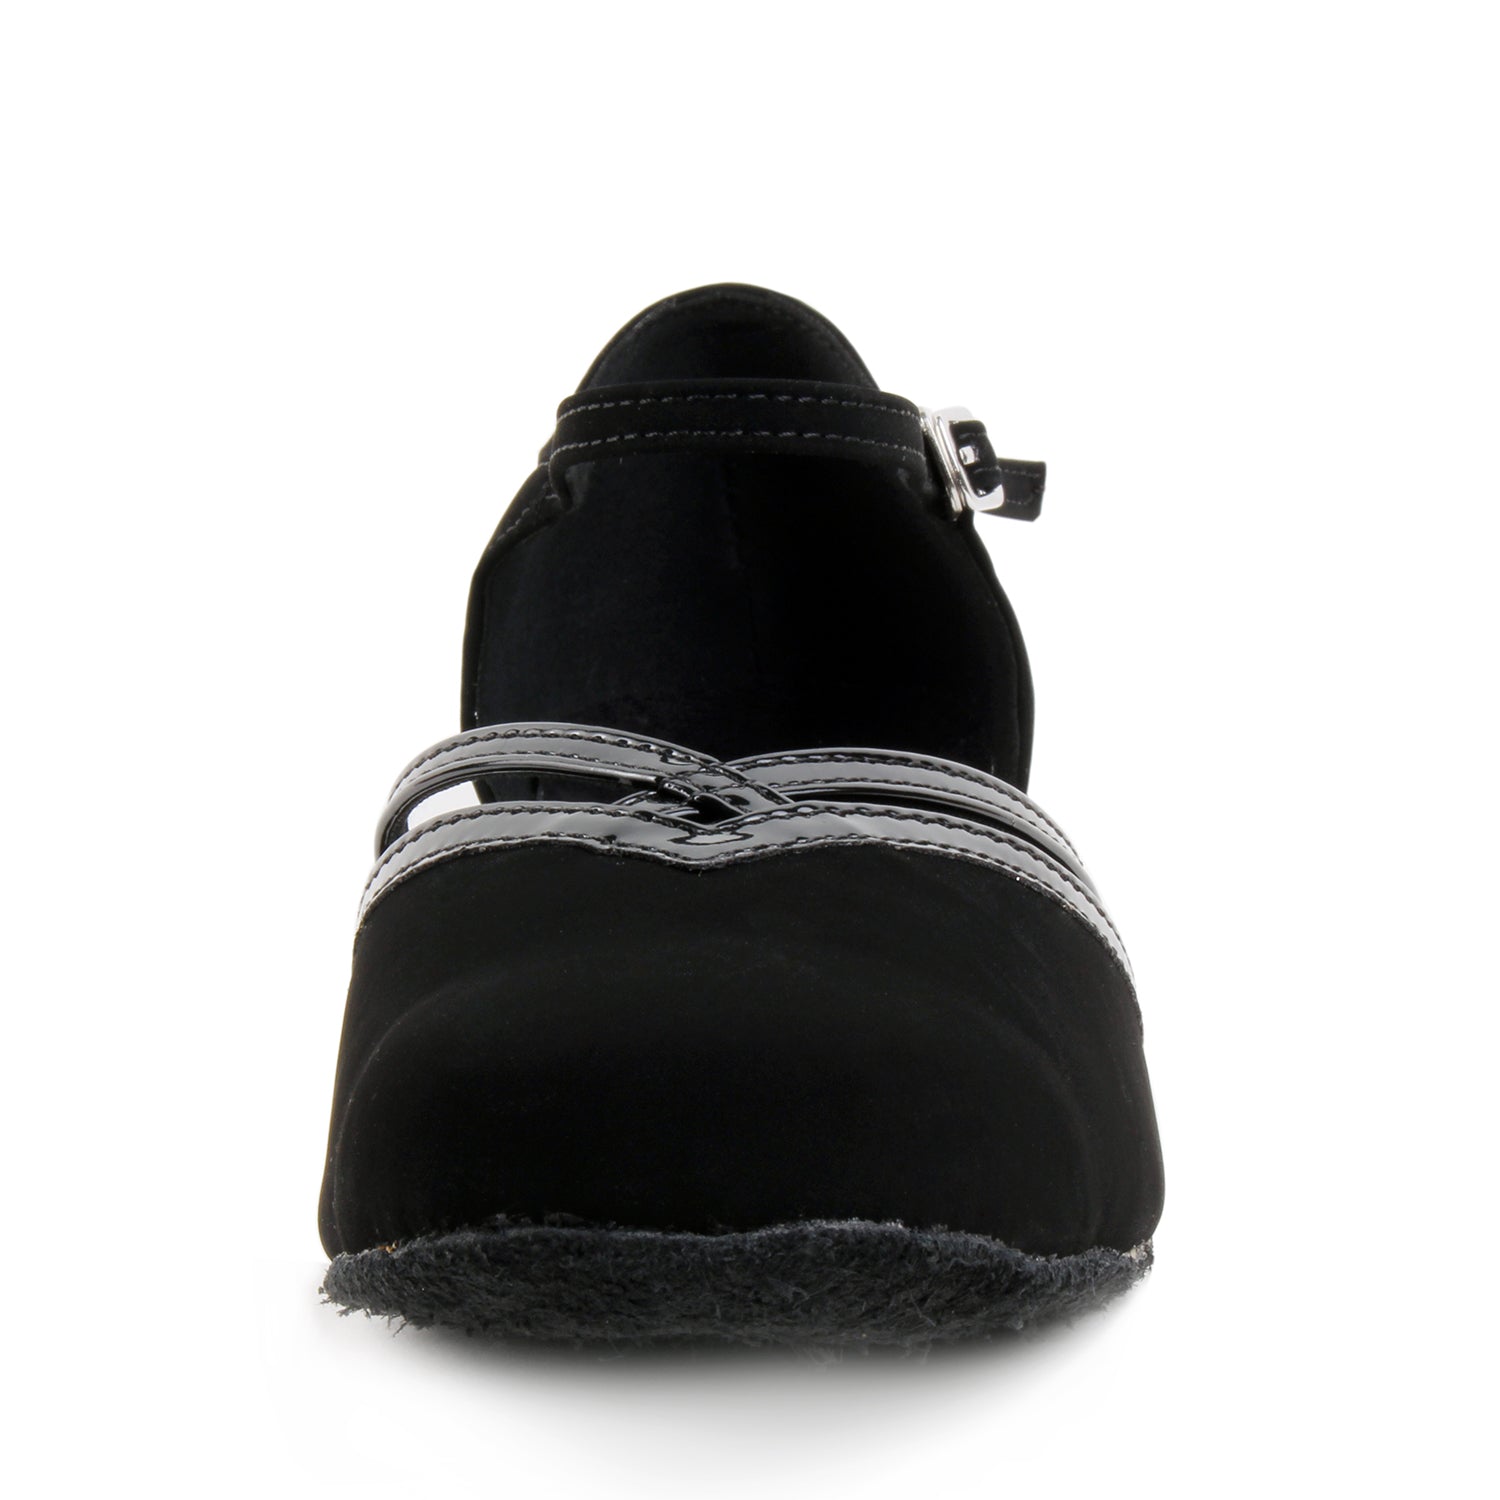 Women Ballroom Dancing Shoes with Suede Sole and Buckle-up Closed-toe in Black for Tango Latin Practice (PD8881A)5